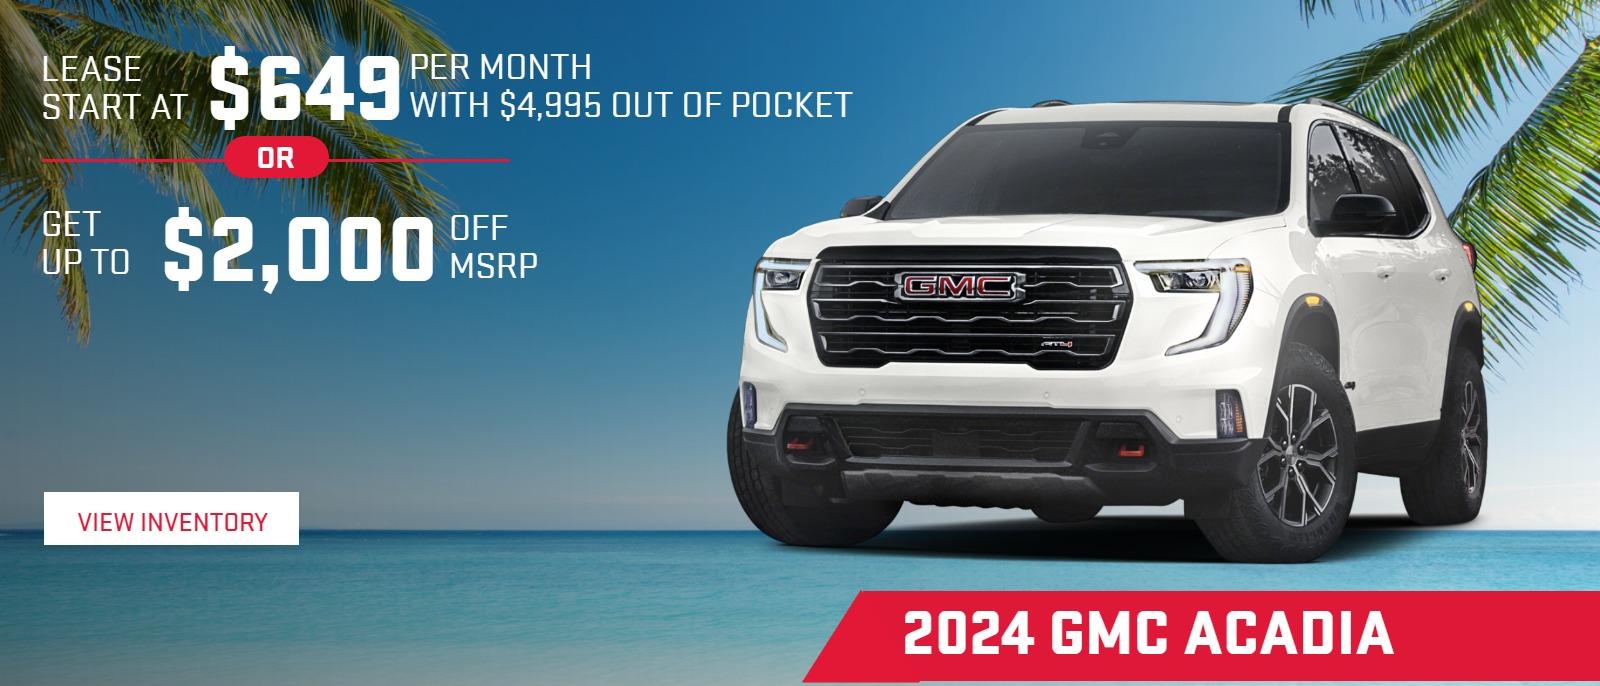 2024 GMC Acadia
Leasses Start at $649 per month with $4995 out of pocket ***
Get up to $2000 off *